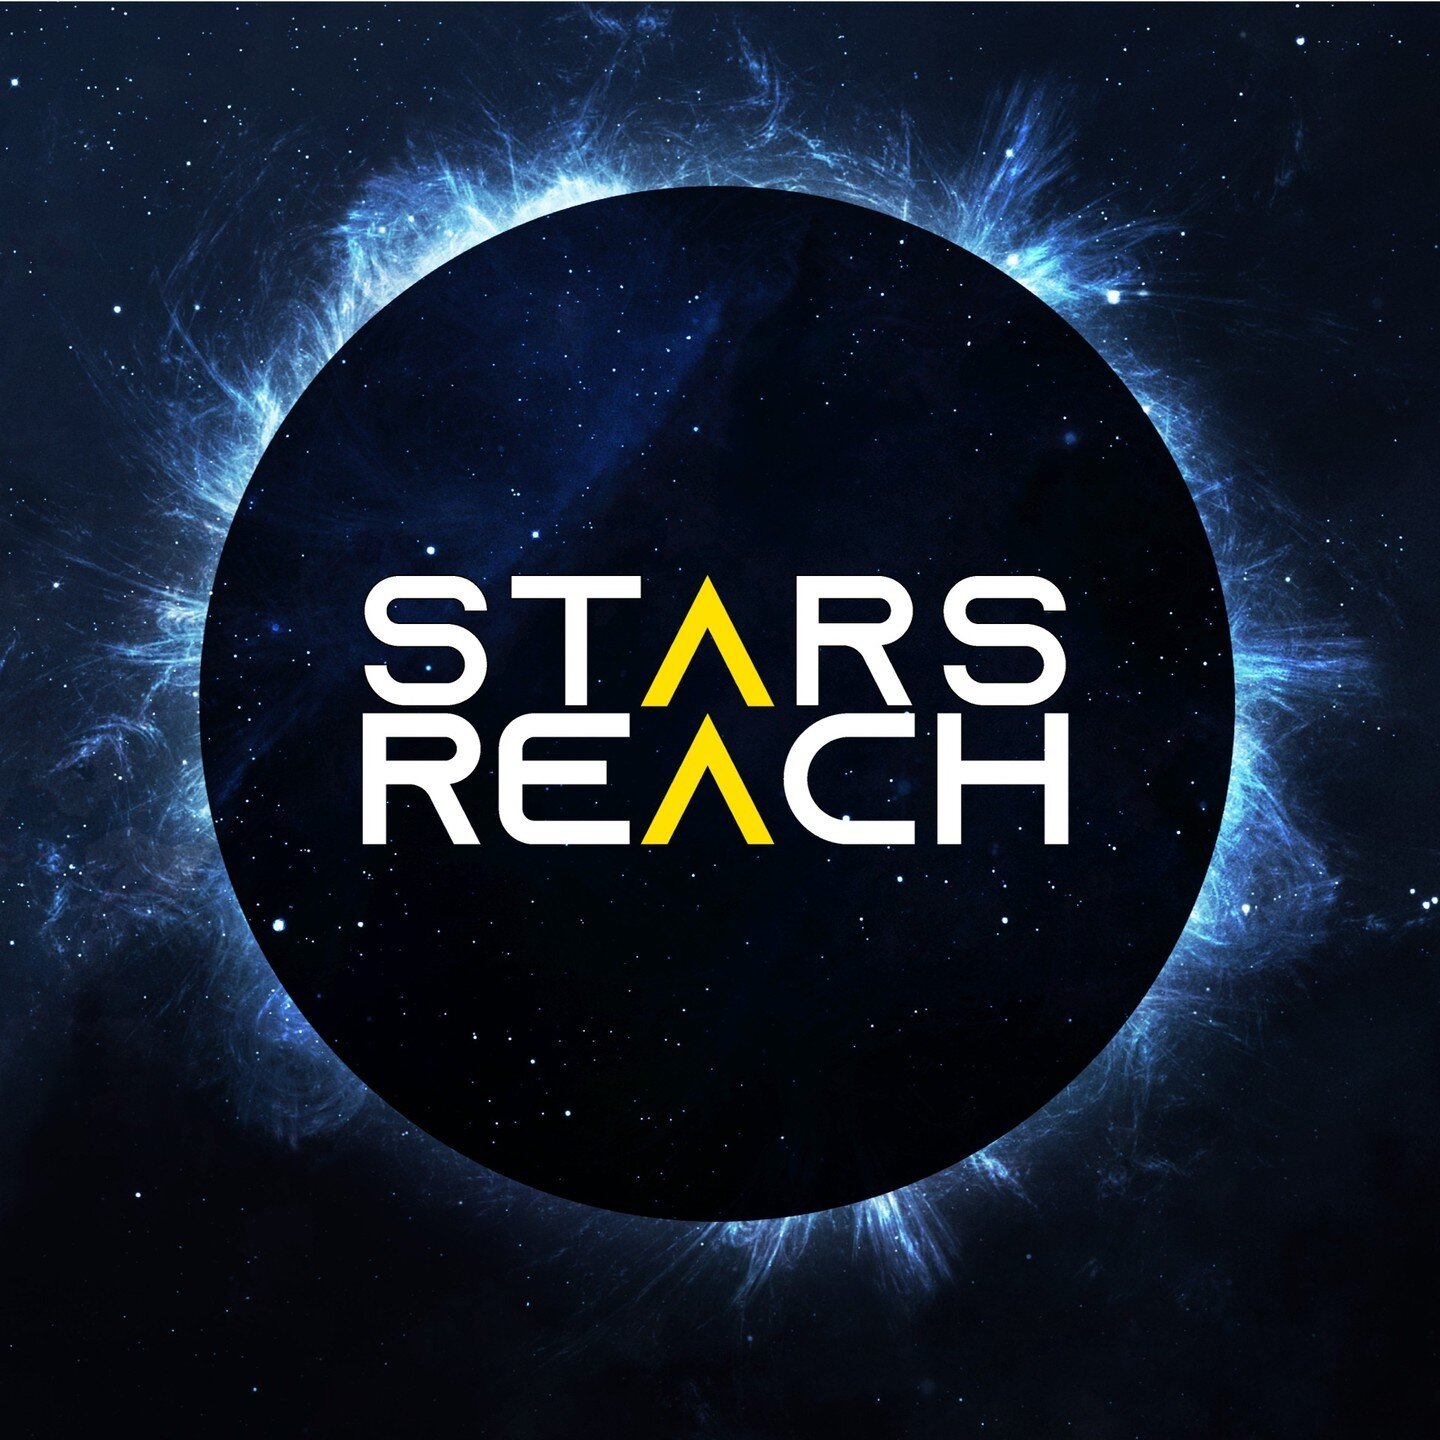 Well, now that Book Two is underway, I'm doing some brainstorming for Stars Reach Book Three. I didn't realize it before, but I'm thinking book three will be the final book for Stars Reach...and it kinda makes me sad. 😔

If I could sum up this serie